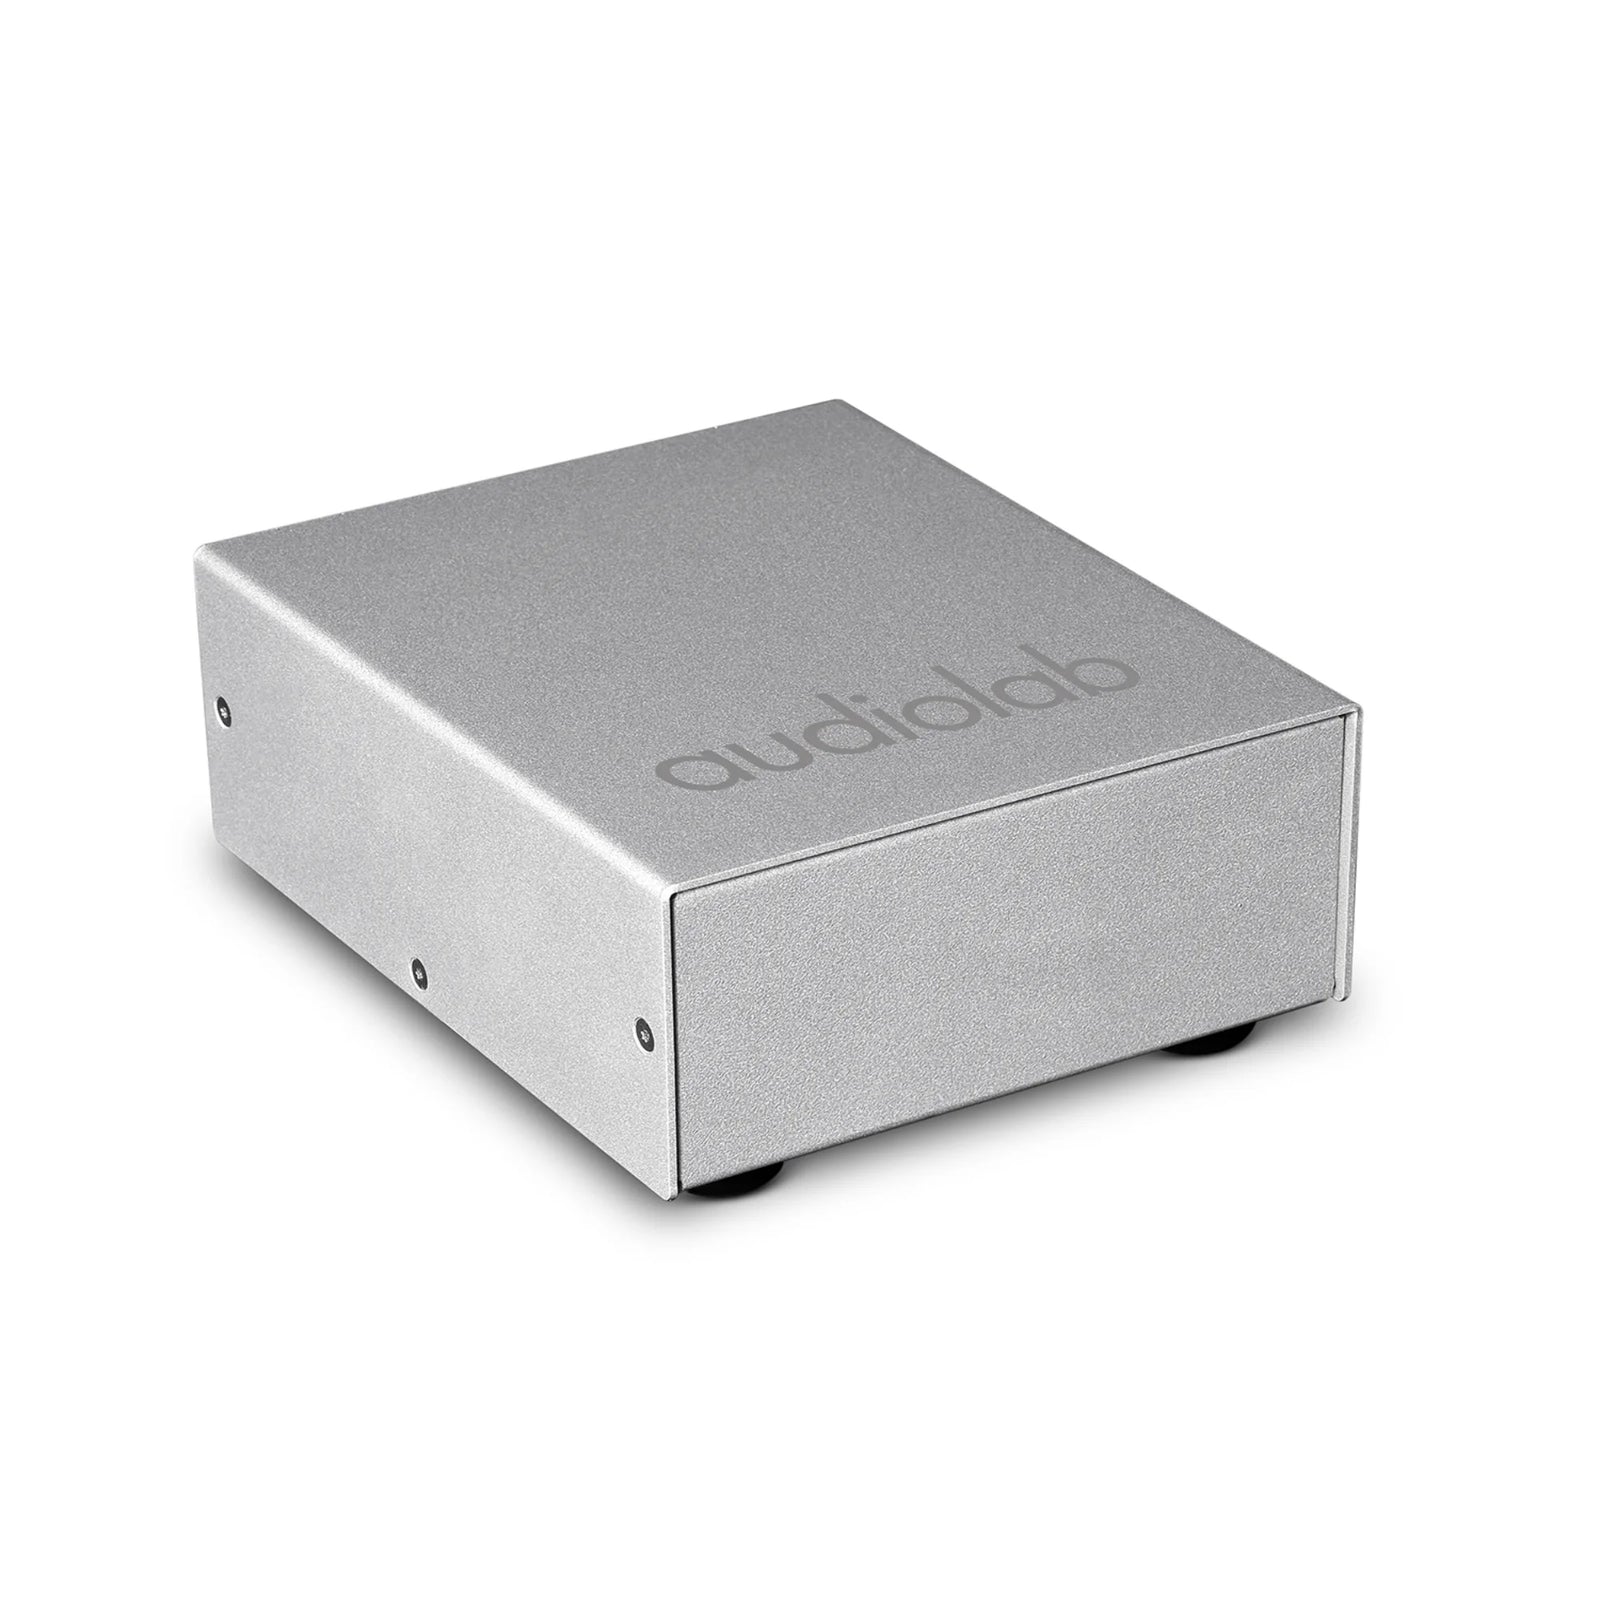 AUDIOLAB DC BLOCK DIRECT CURRENT BLOCKER The DC Block has been designed to improve the quality of AC electricity that feeds our audio and AV systems. Mains electricity has a fundamental influence on the audio signal as it passes through a system, from source to amp to speakers.